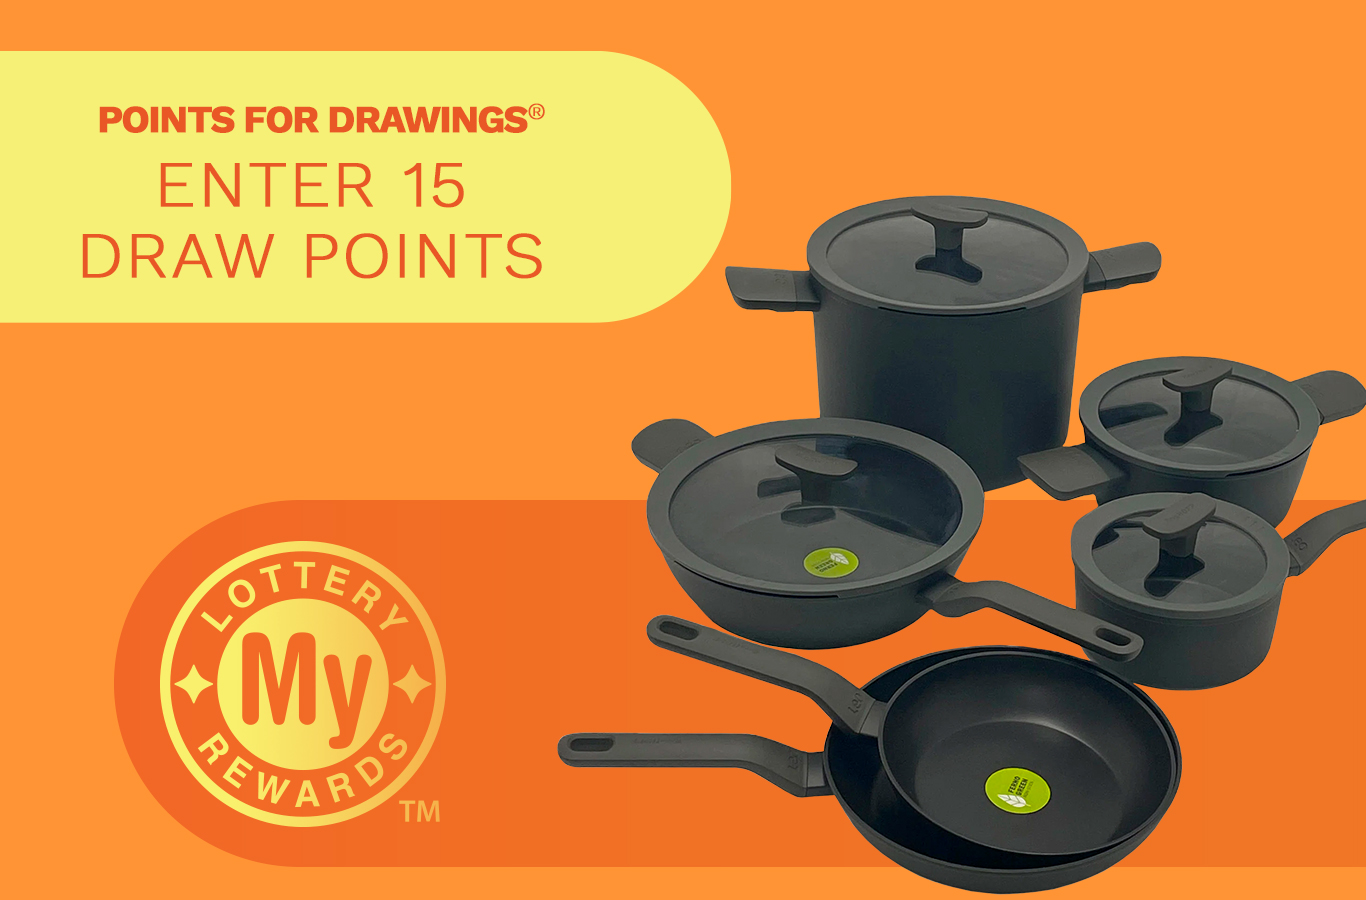 Here's your chance to win a BergHOFF® Cookware Set! Enter by Tuesday, October 3rd.